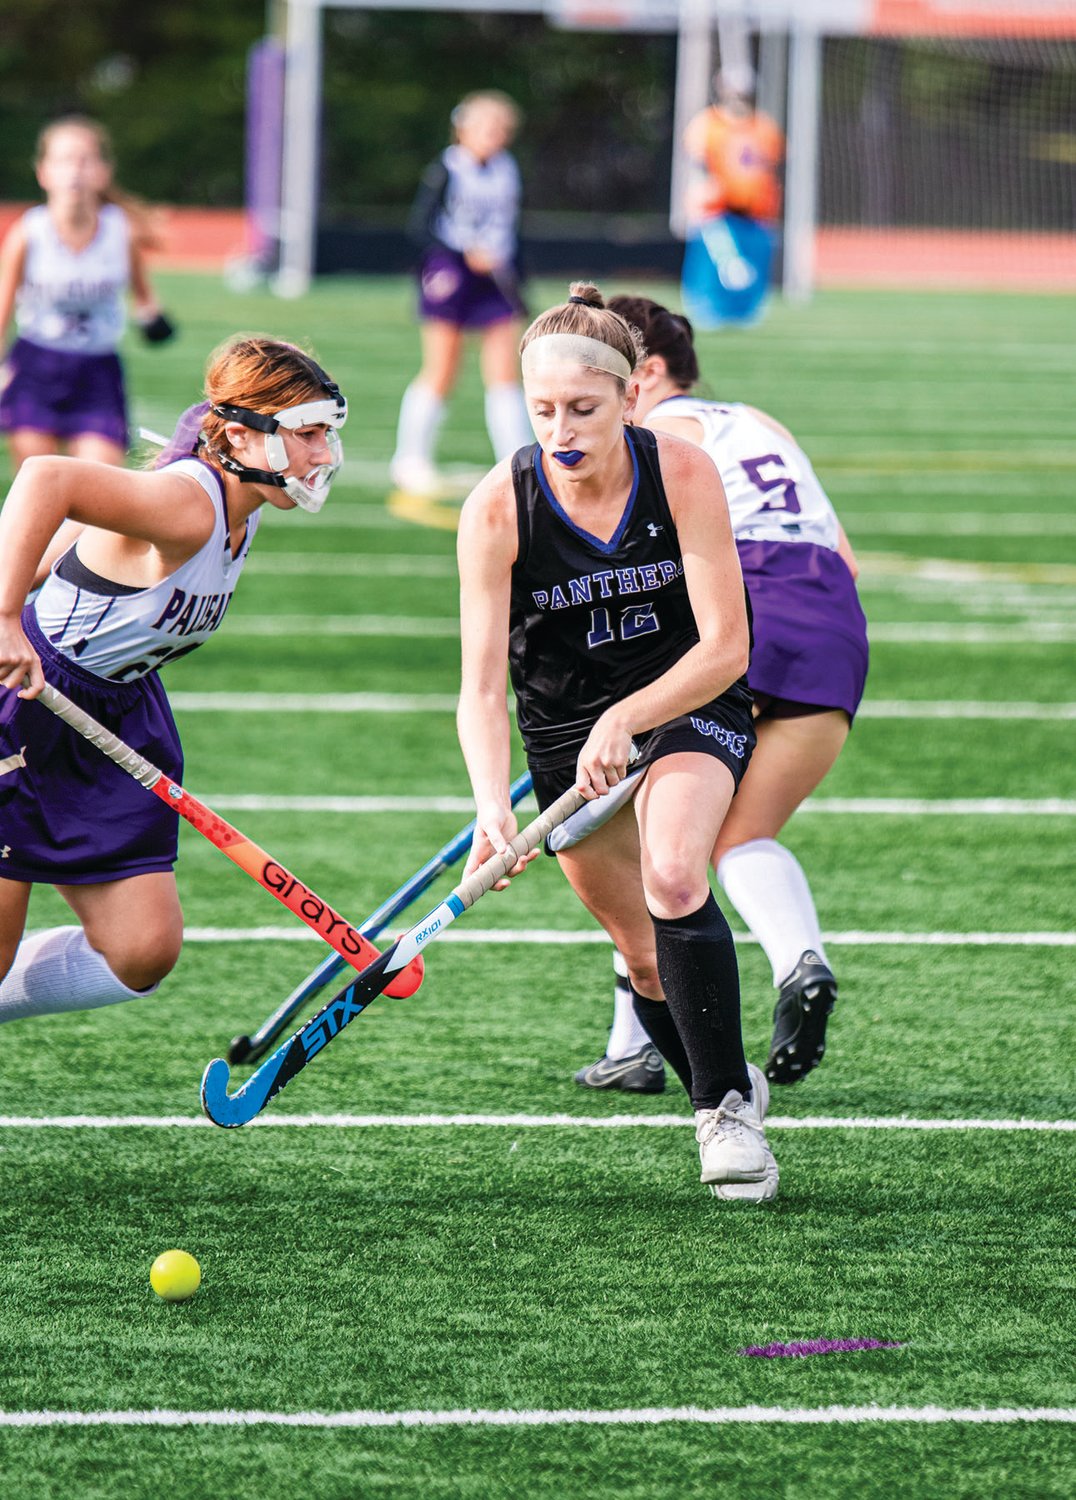 Quakertown’s Alexis Mowrer scored the game-winning goal for the Panthers.